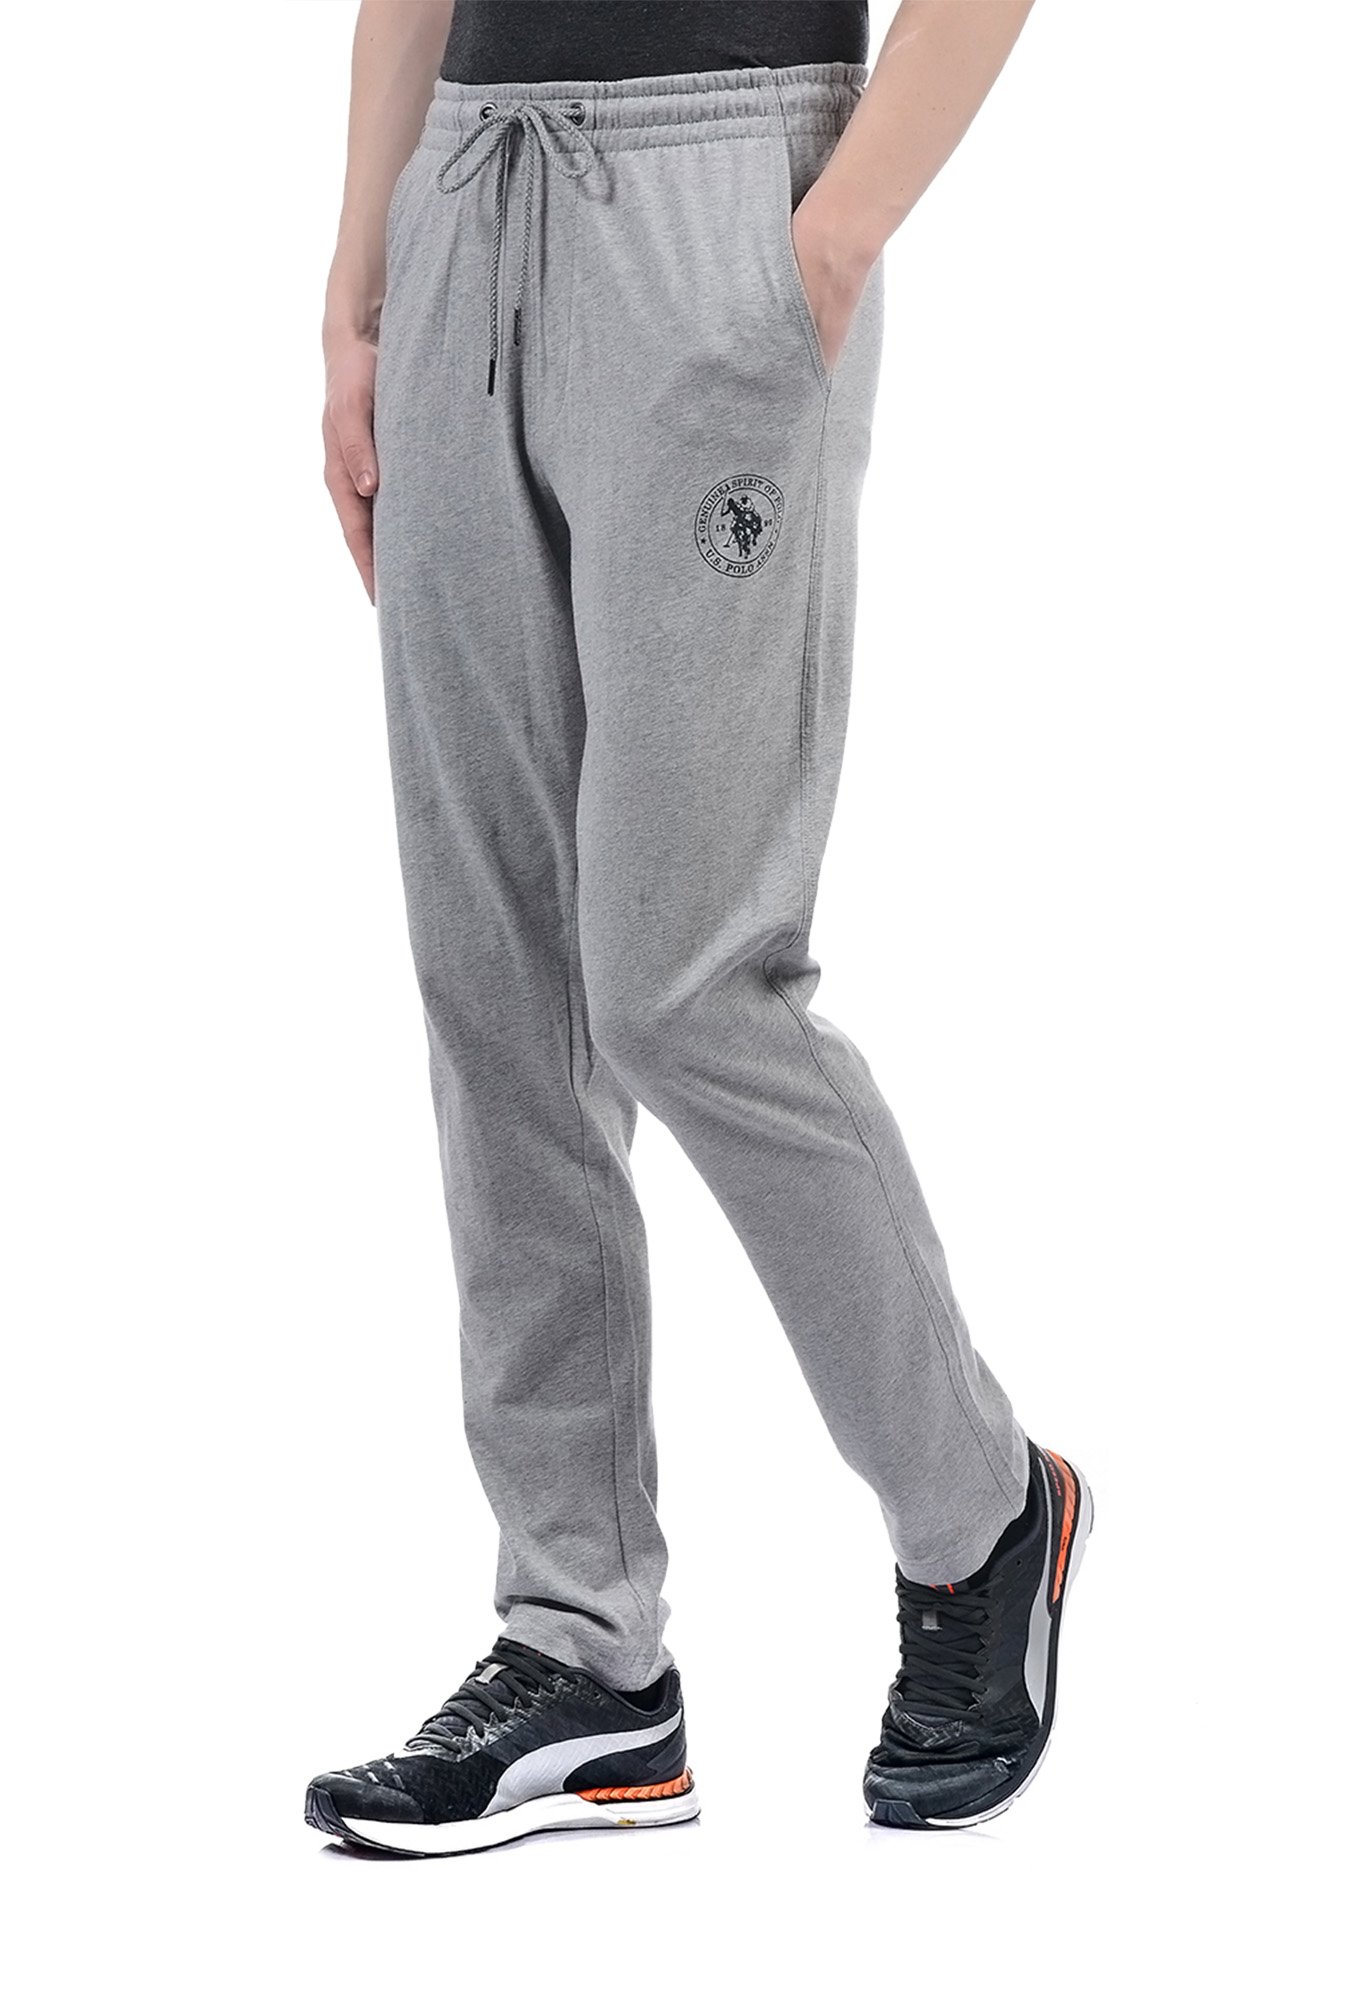 Buy U S Polo Assn Grey Track Pants for Men I631 Online  Route2Fashion